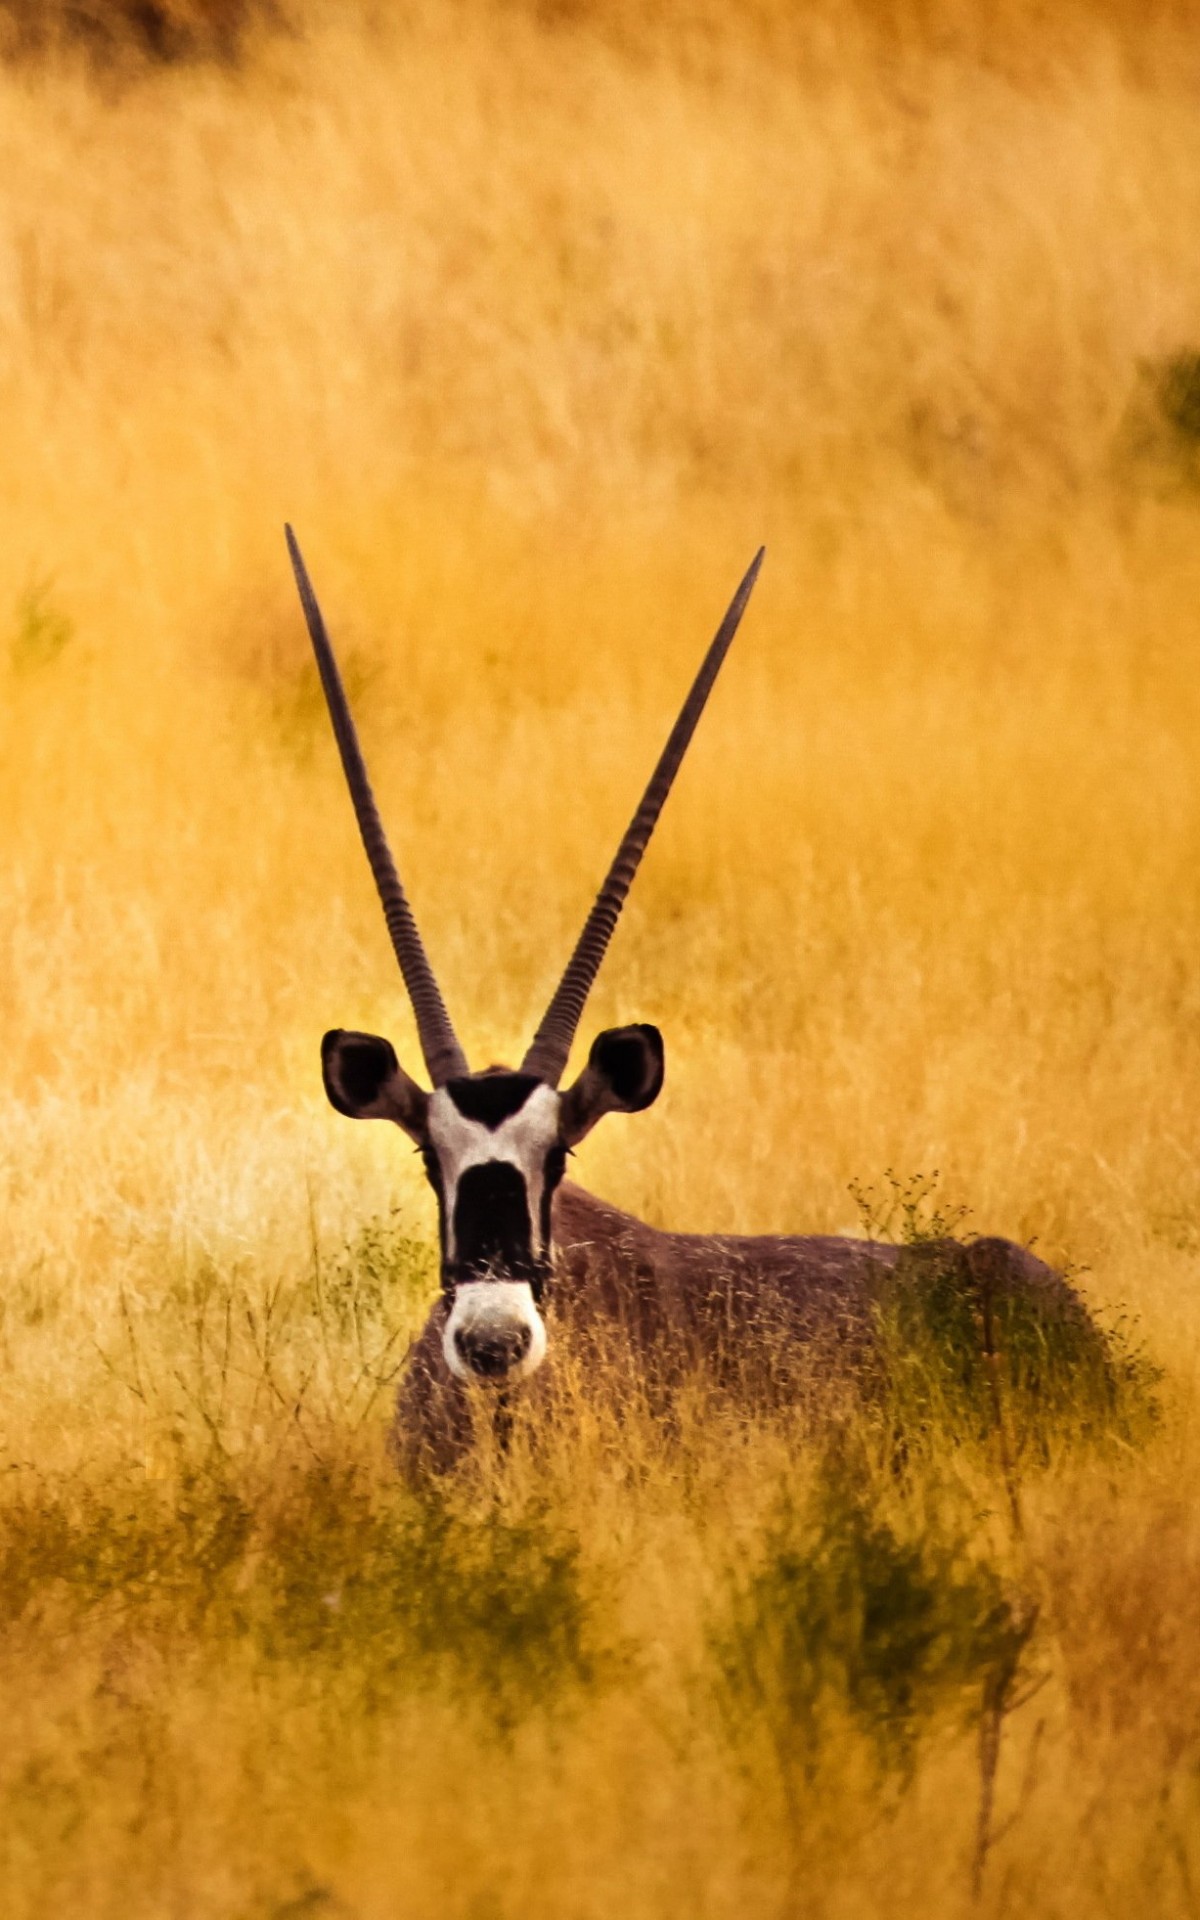 Antelope In The Savanna Wallpaper for Amazon Kindle Fire HDX